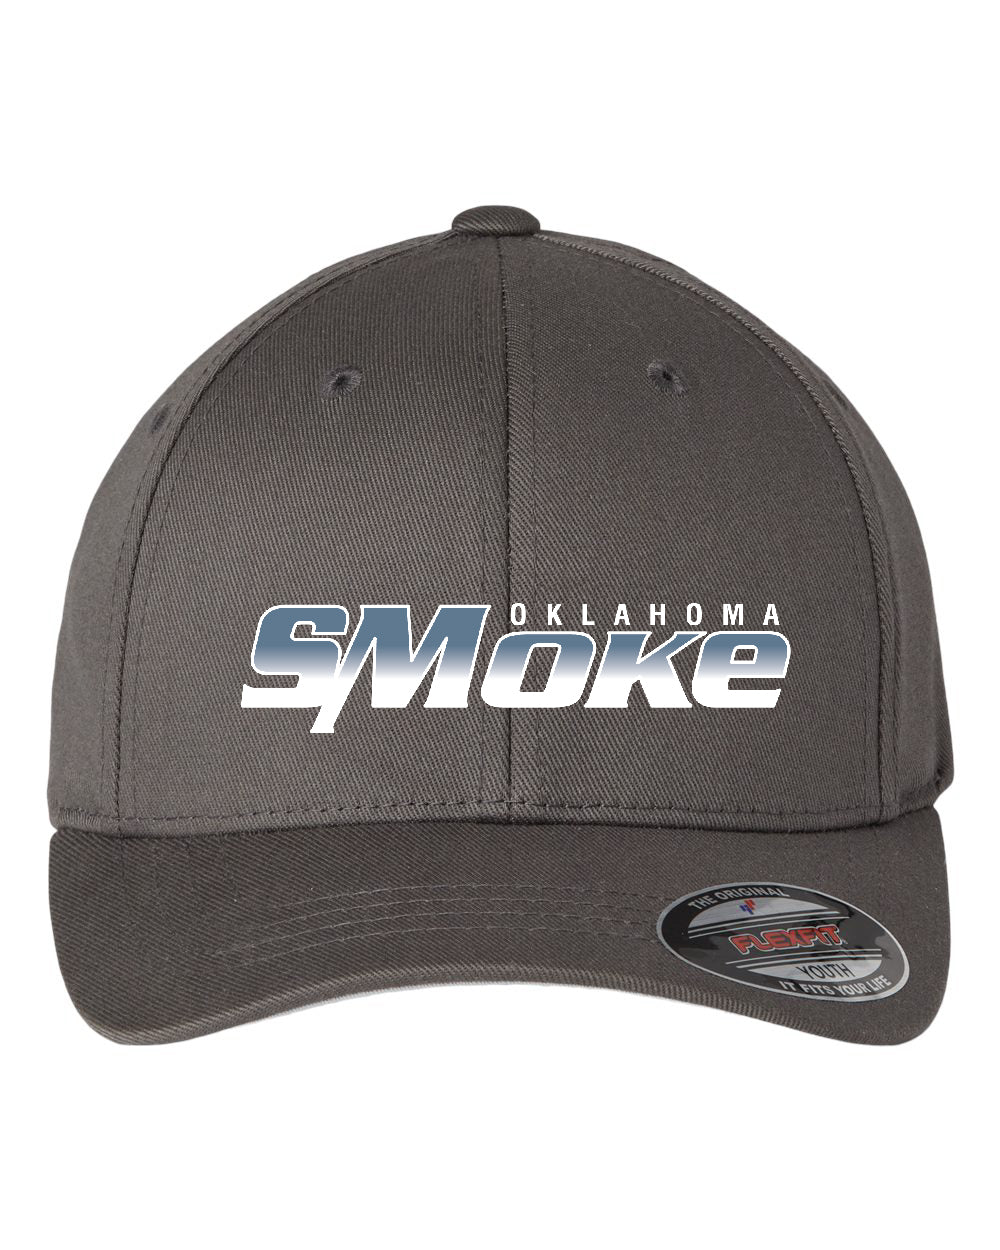 Oklahoma Smoke Embroidered Flex Fit Hat Youth or Adult